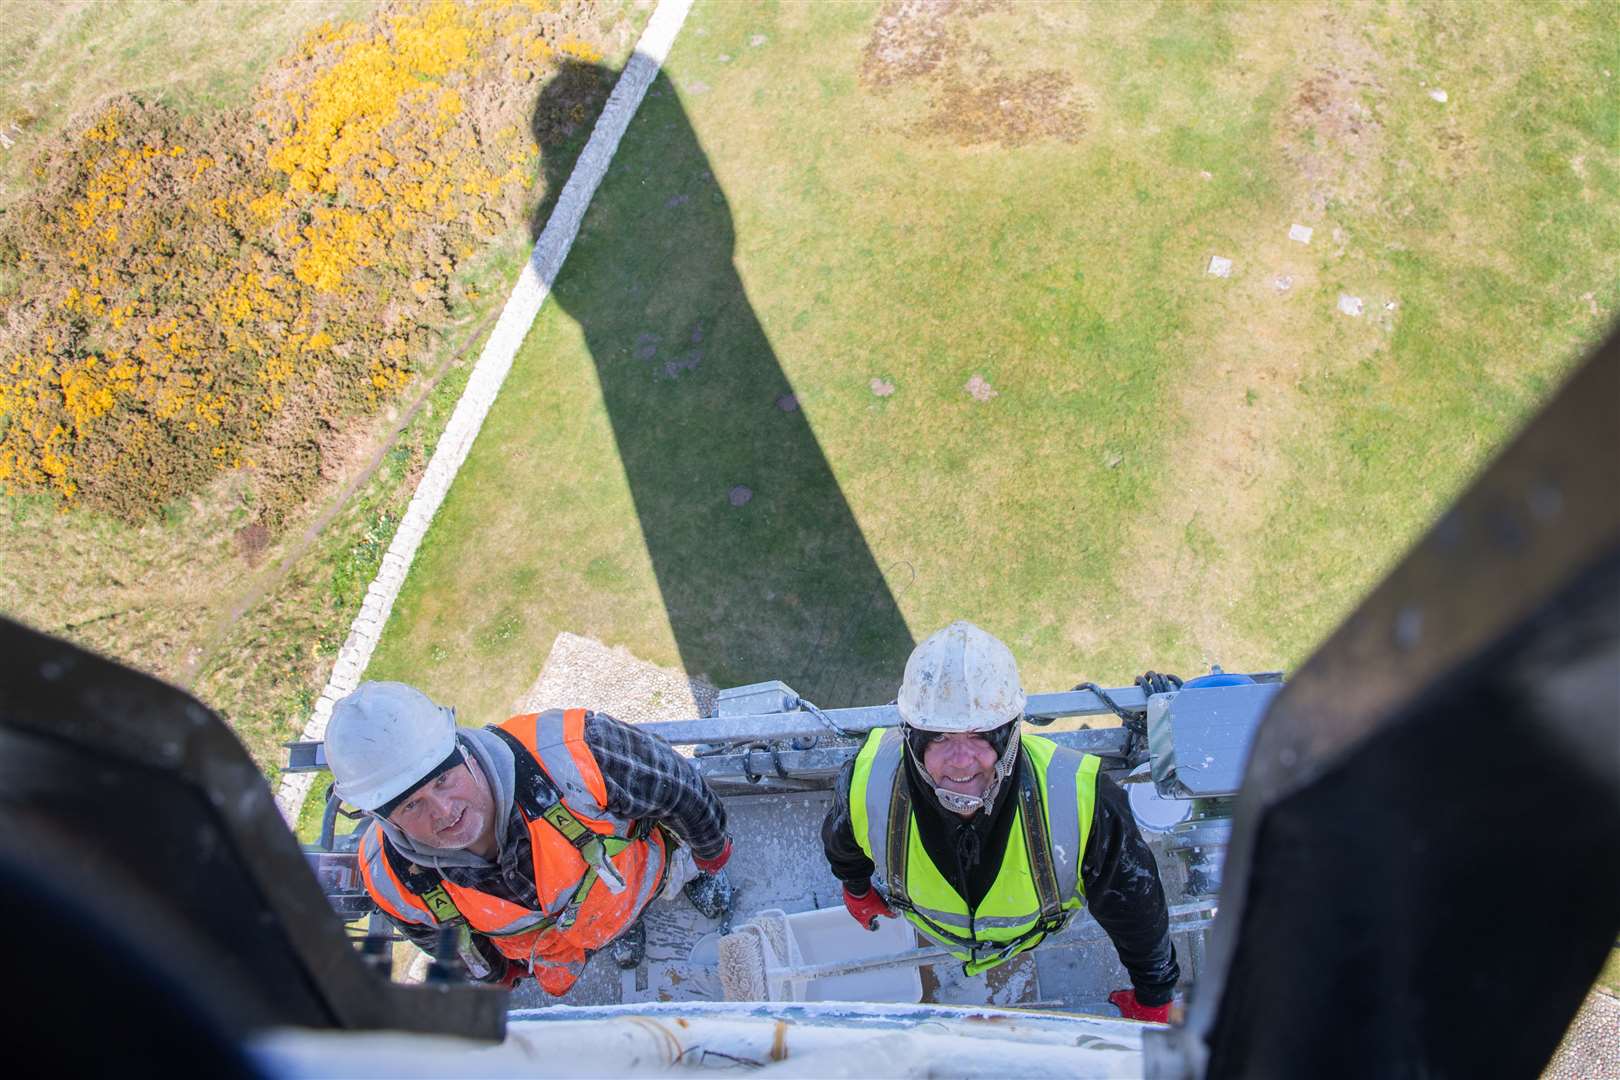 Darren Marshall (left) and Stevie Martin (right) on the platform suspended on the lighthouse tower. Picture: Daniel Forsyth